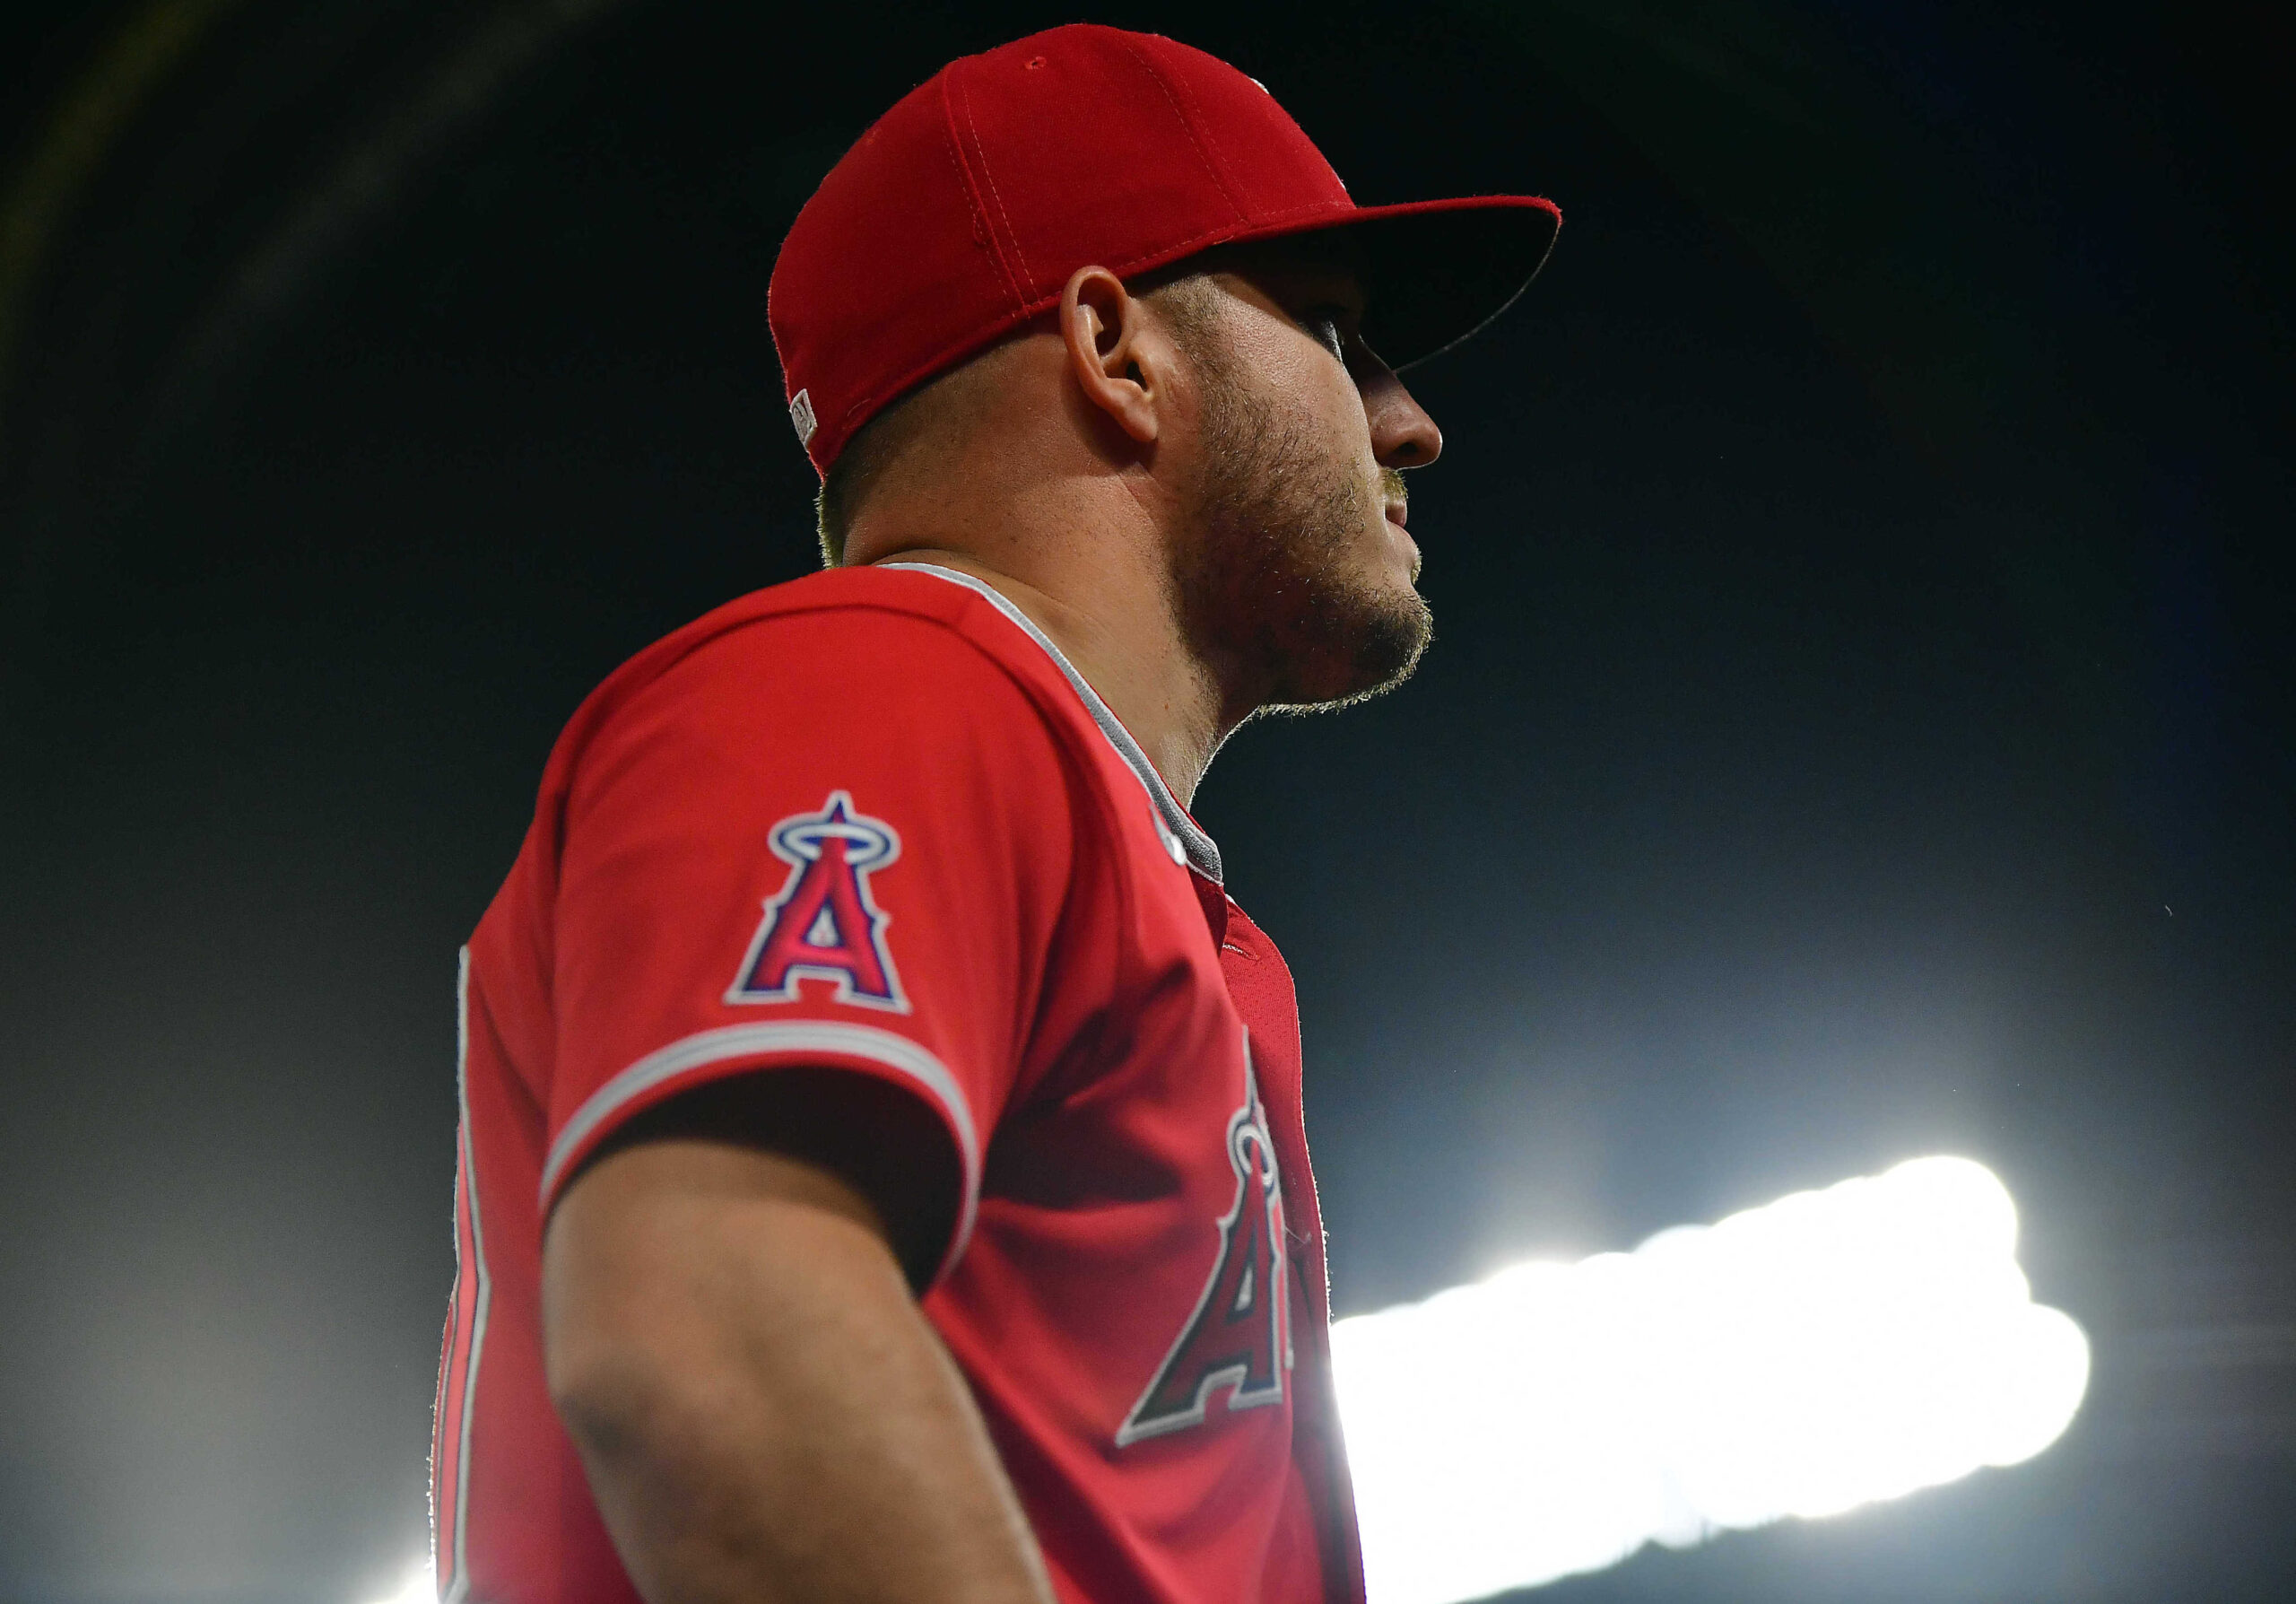 After draft, Millville's Mike Trout back to real life, for now